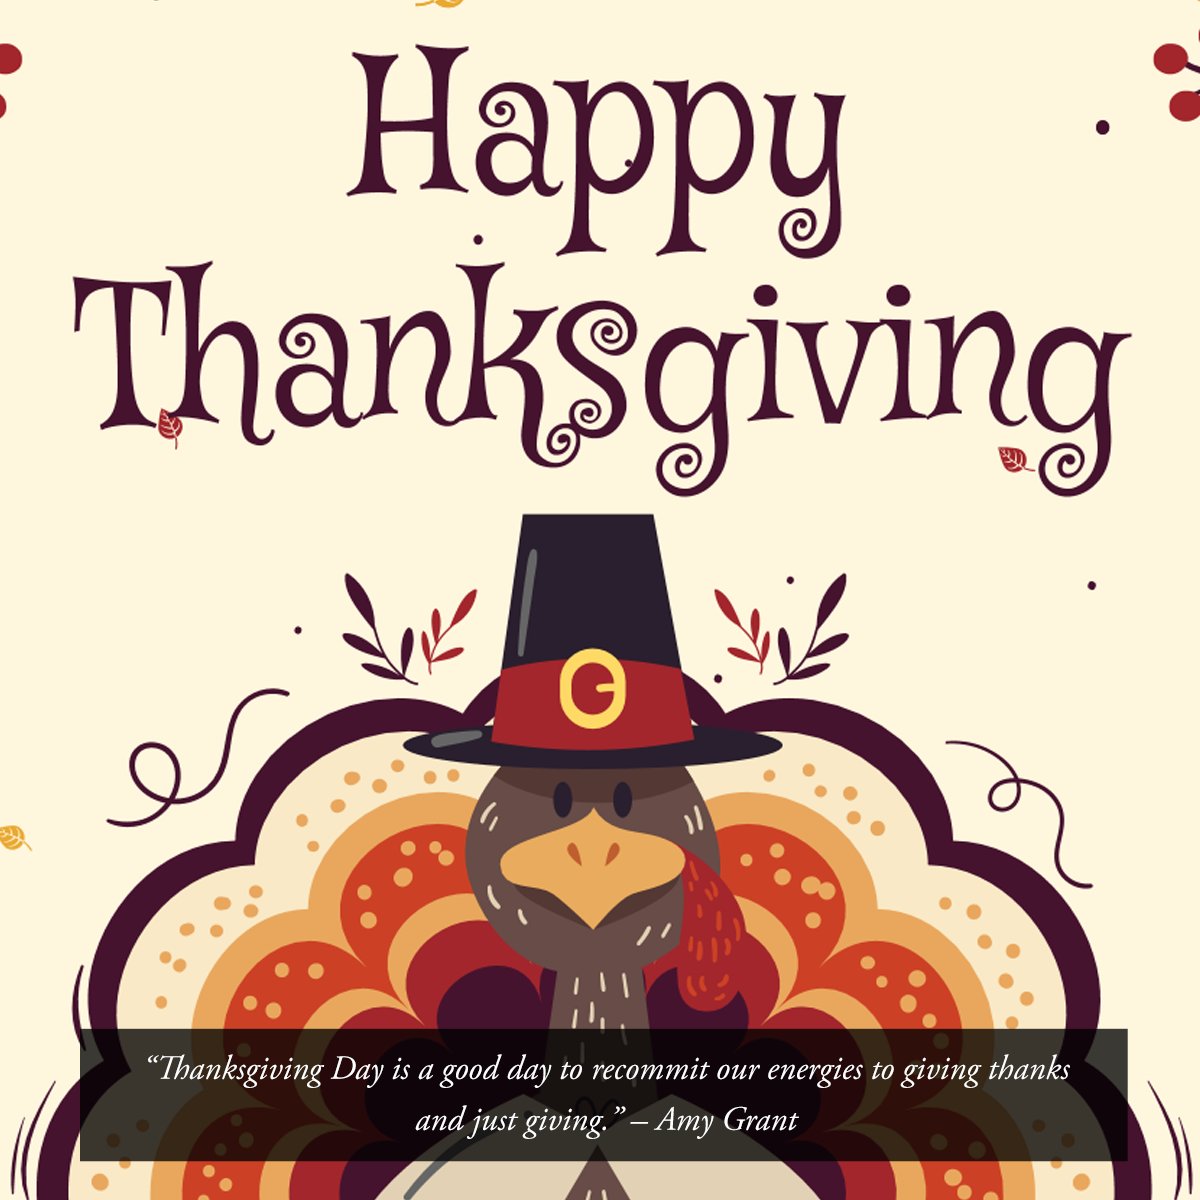 We’re thankful for all of our customers! Thank you for being a part of our journey this year. #baltimore #maryland #collisionequipment #givingthanks #autobodyequipment #spanesi #polyvance #nitroheat #betag #gys #americaninnovativemanufacturing